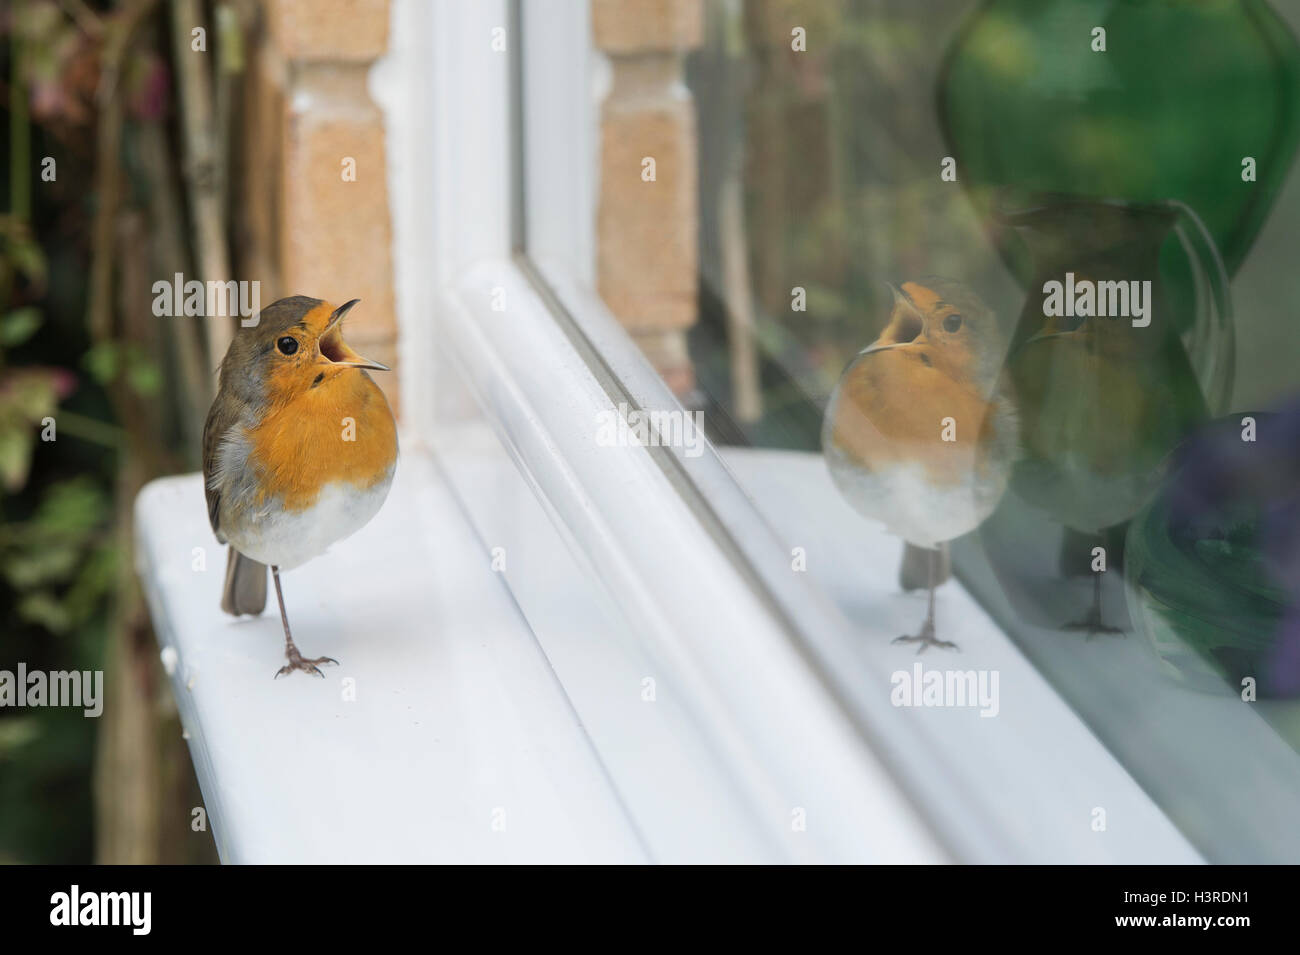 Erithacus Rubecula. Robin standing on one leg on a window ledge singing, looking at his reflection. UK Stock Photo